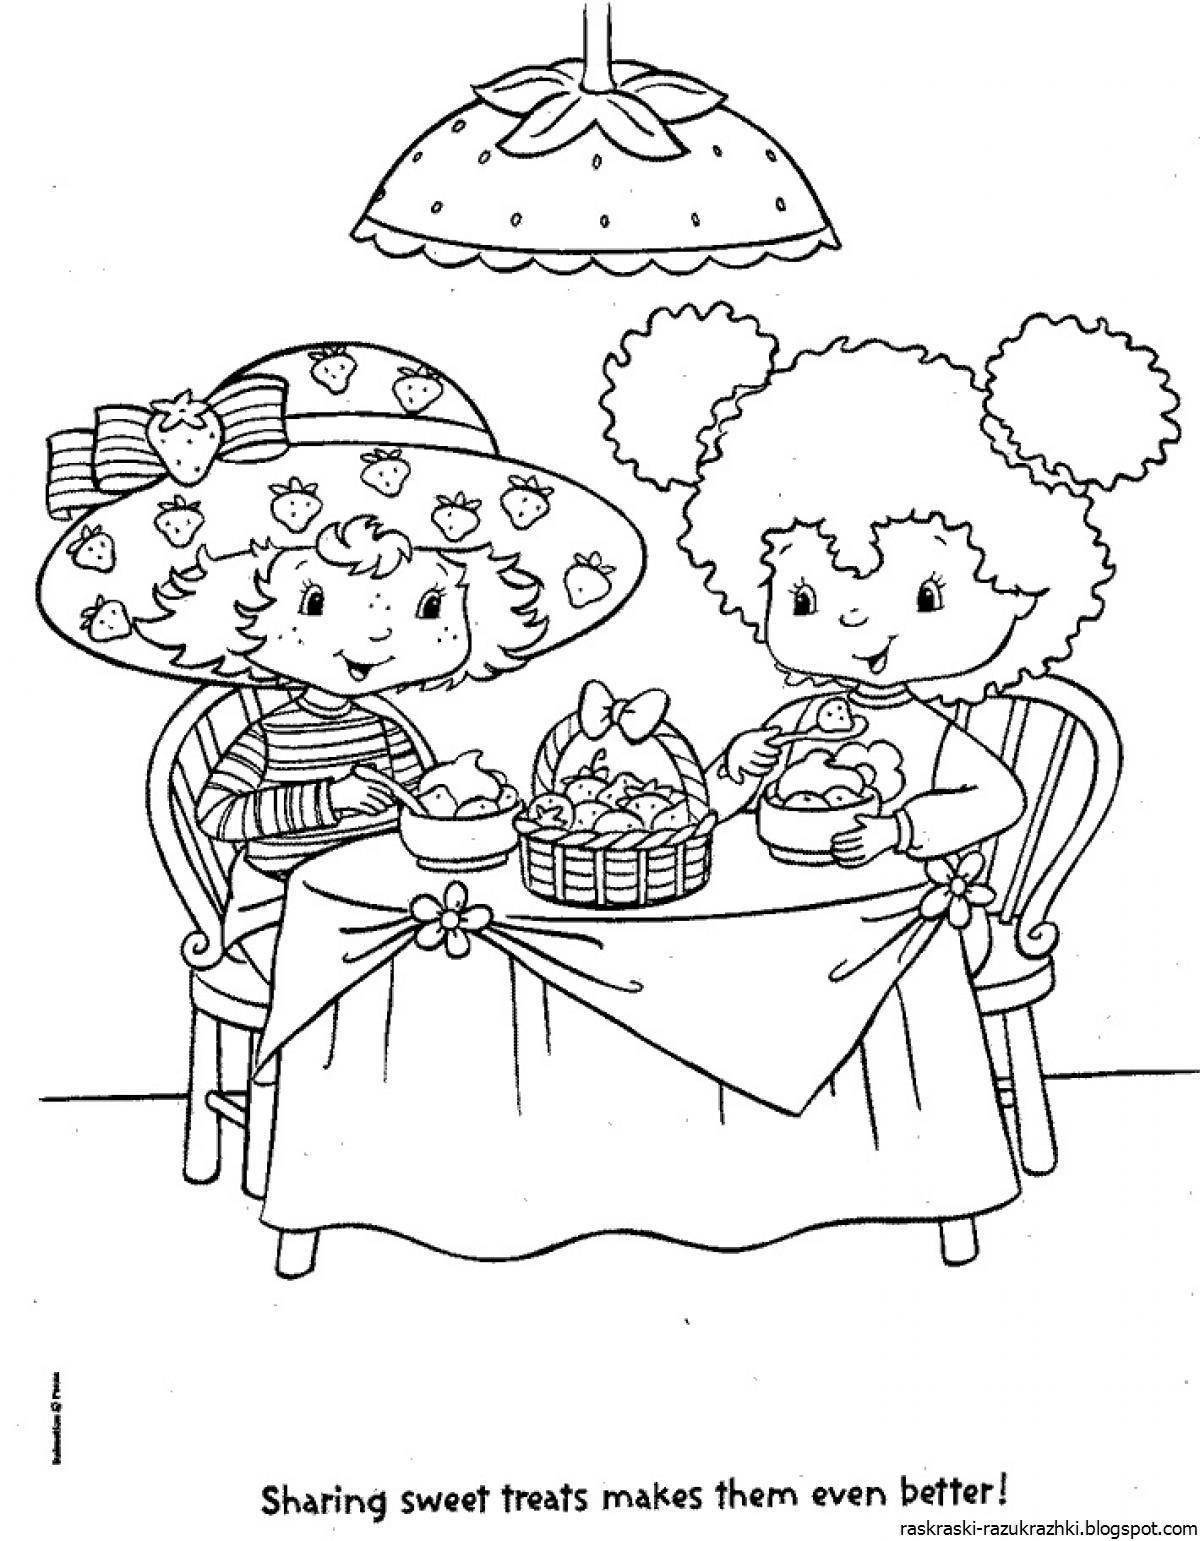 Creative etiquette coloring book for kids